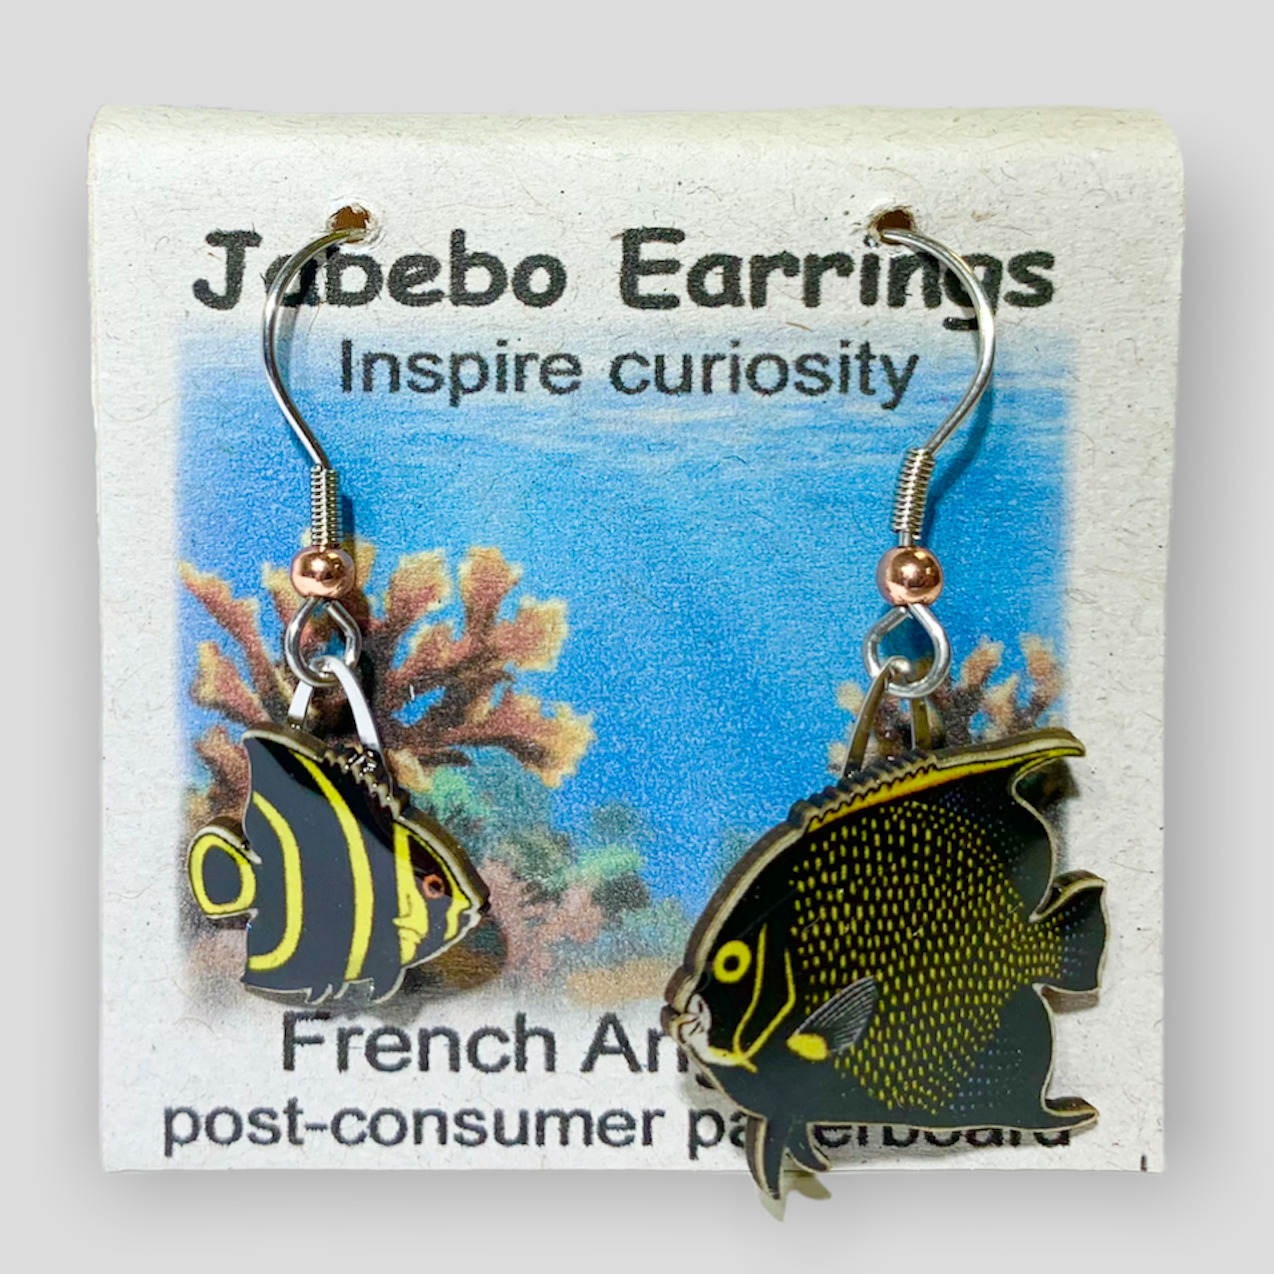 Picture shown is of 1 inch tall pair of earrings of the fish the French Angelfish.